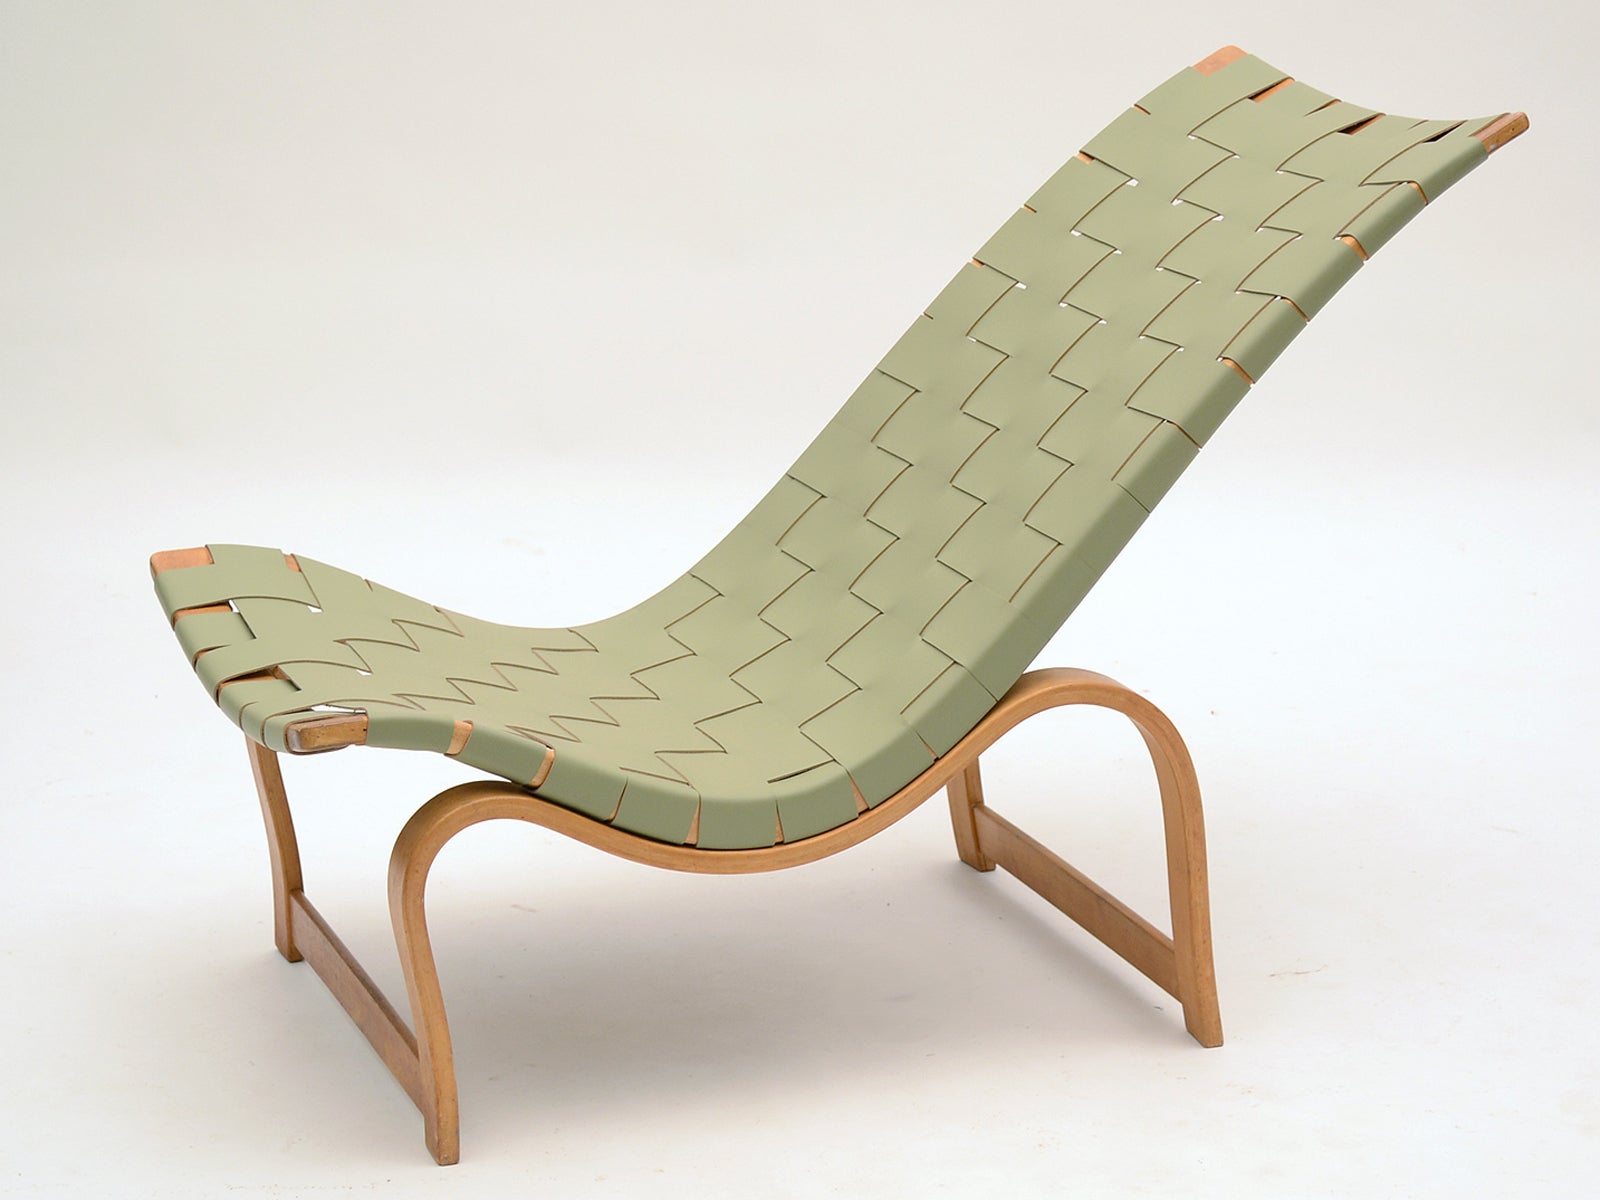 Among the earliest of Bruno Mathsson's designs is this rare model 36 easy chair. It features interesting details that were changed in later production. The legs are uniform in thickness rather than tapered and the stretchers are low on the legs near